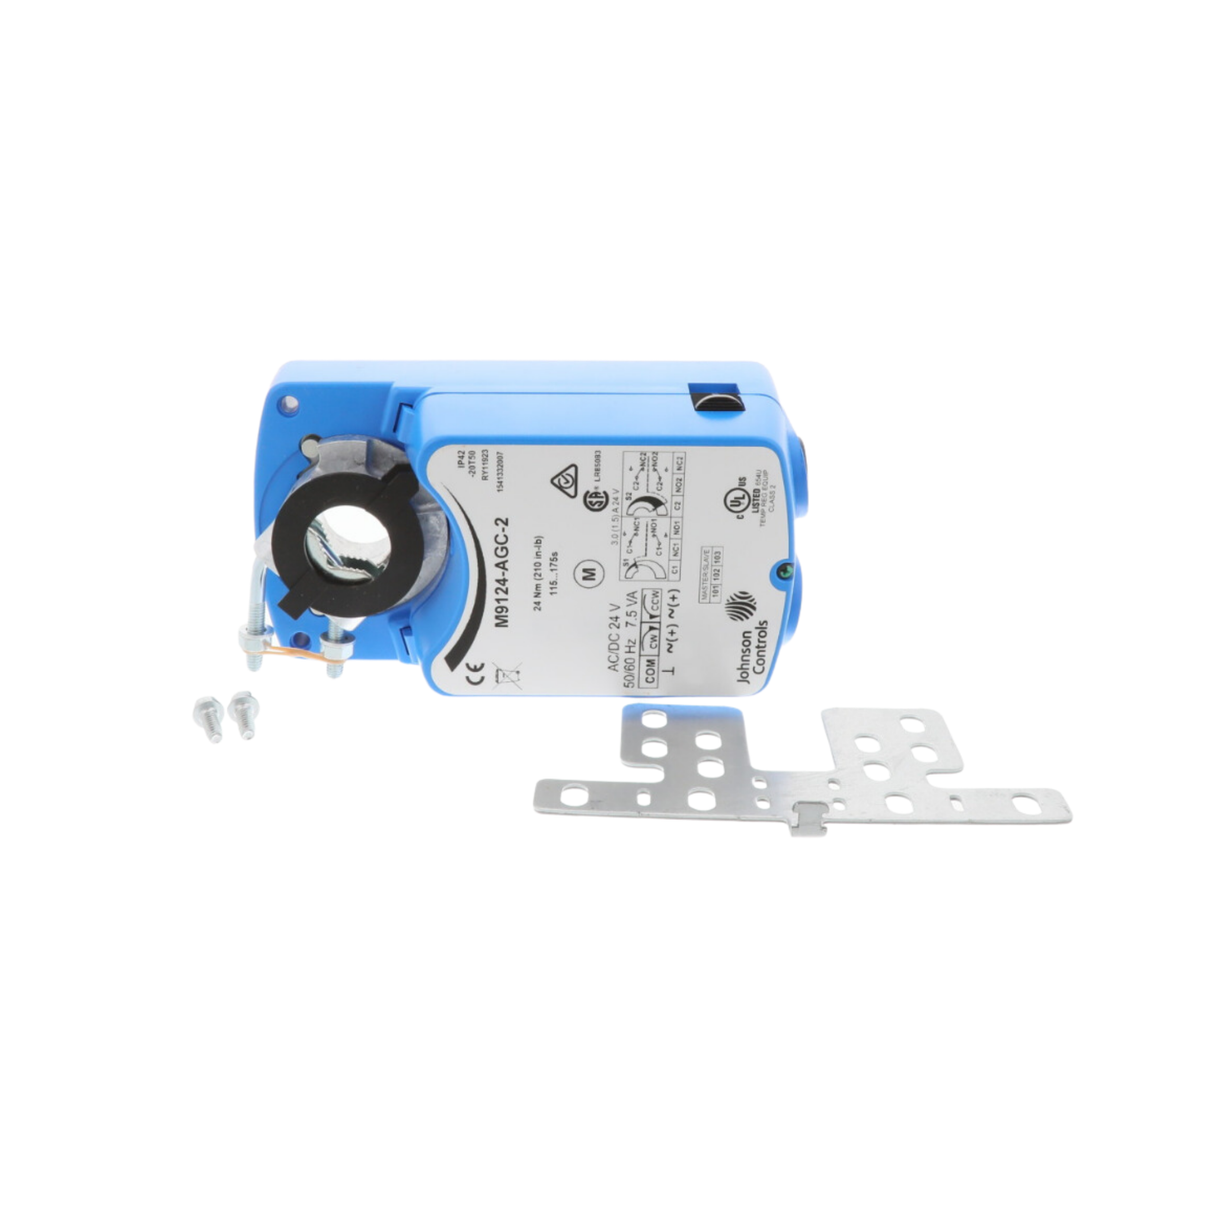 Johnson Controls M9124-AGC-2 24VAC, 24VDC Supply Voltage, Actuator with 2 SPDT Auxiliary Switches